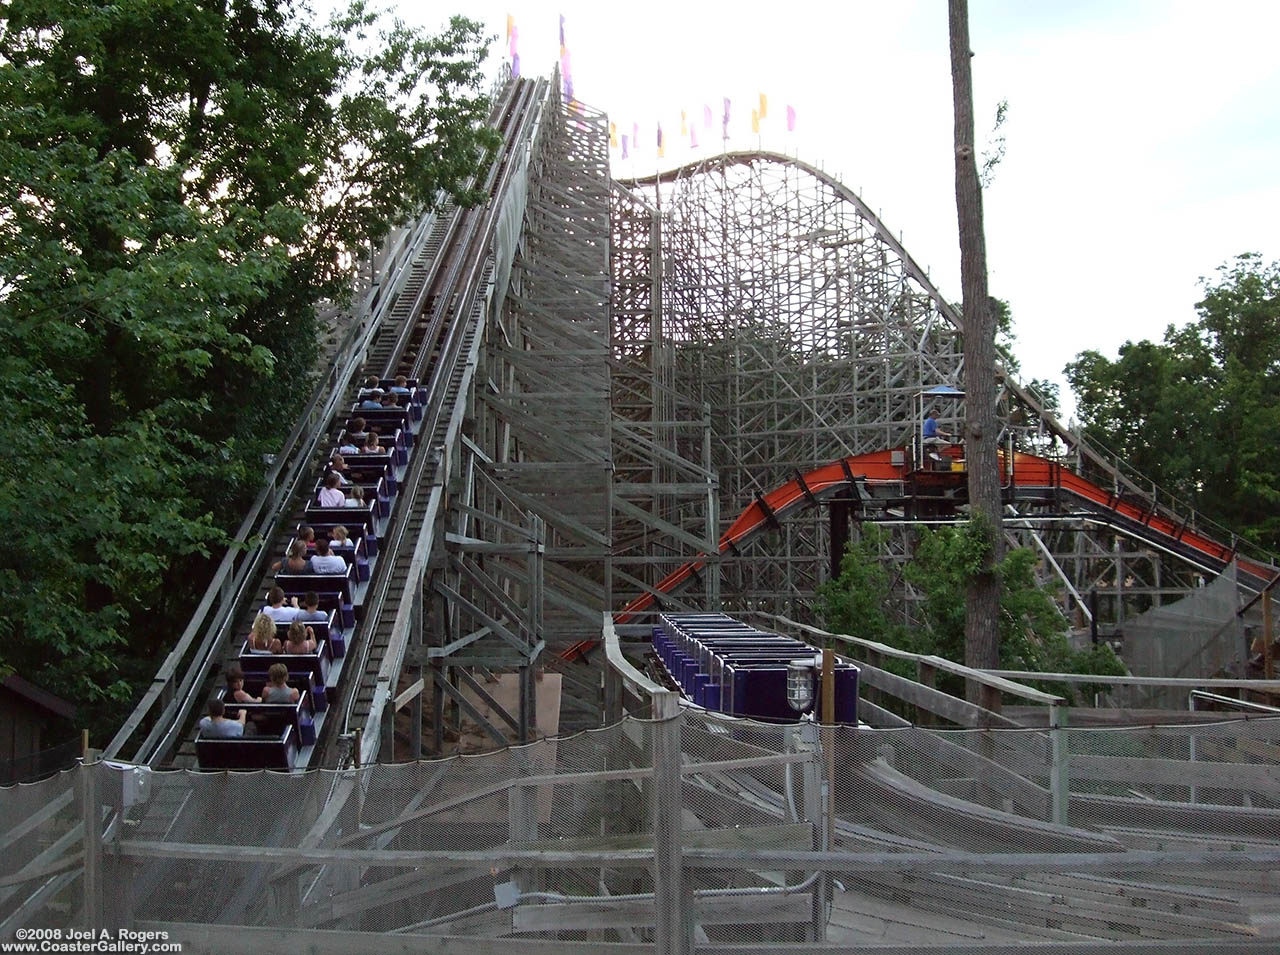 The Legend roller coaster at Holiday World